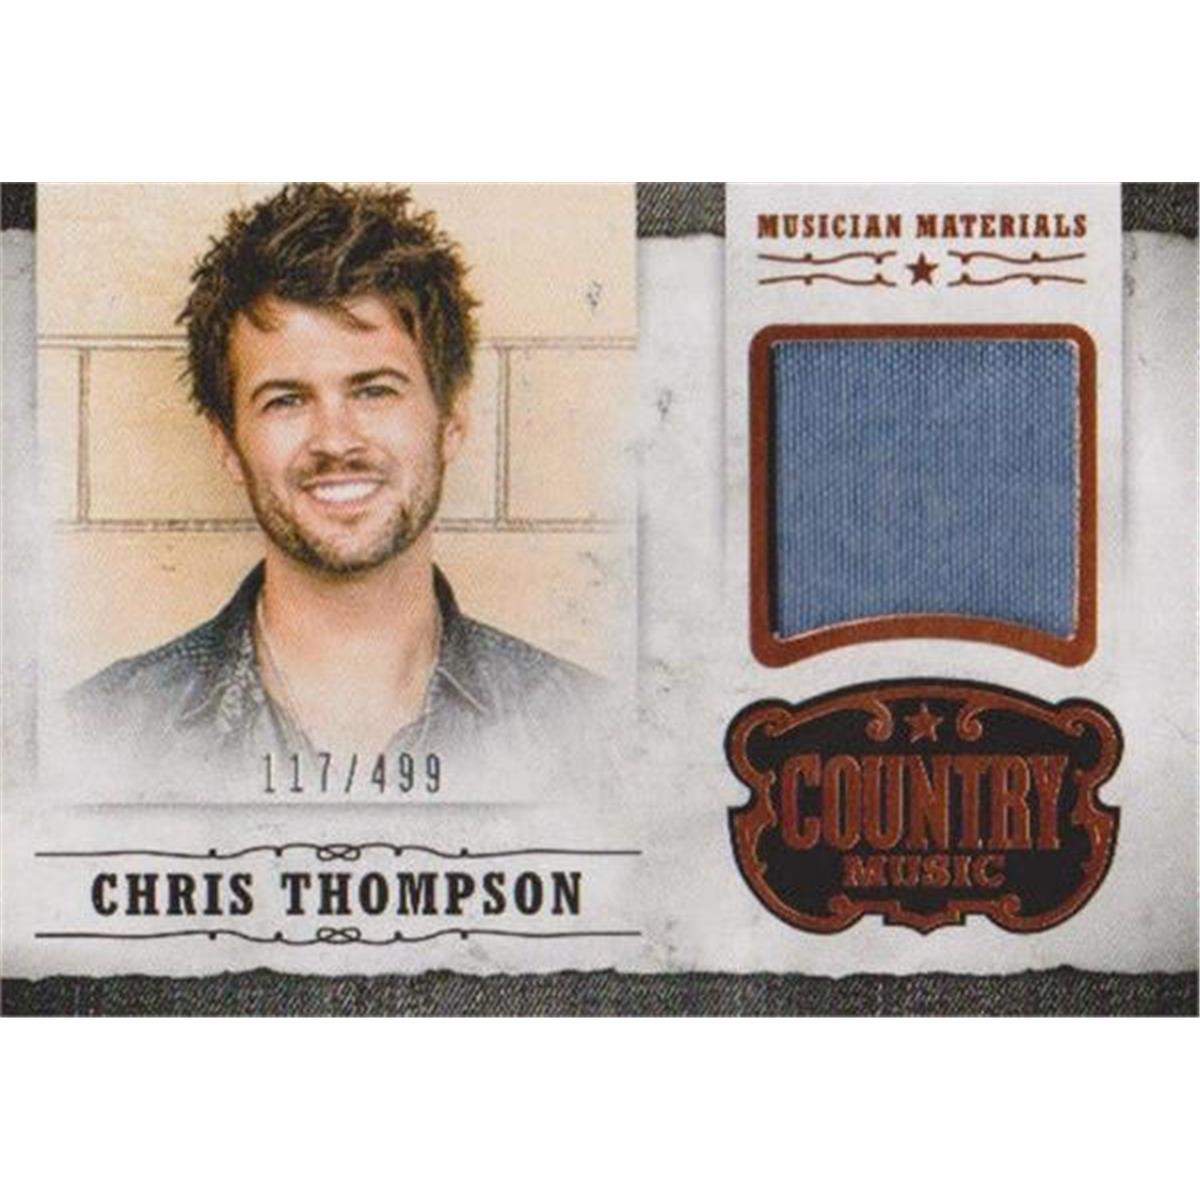 Picture of Autograph Warehouse 409088 Chris Thompson Musician Worn Material Relic Patch Trading Card - 2014 Panini MCT LE 117-499